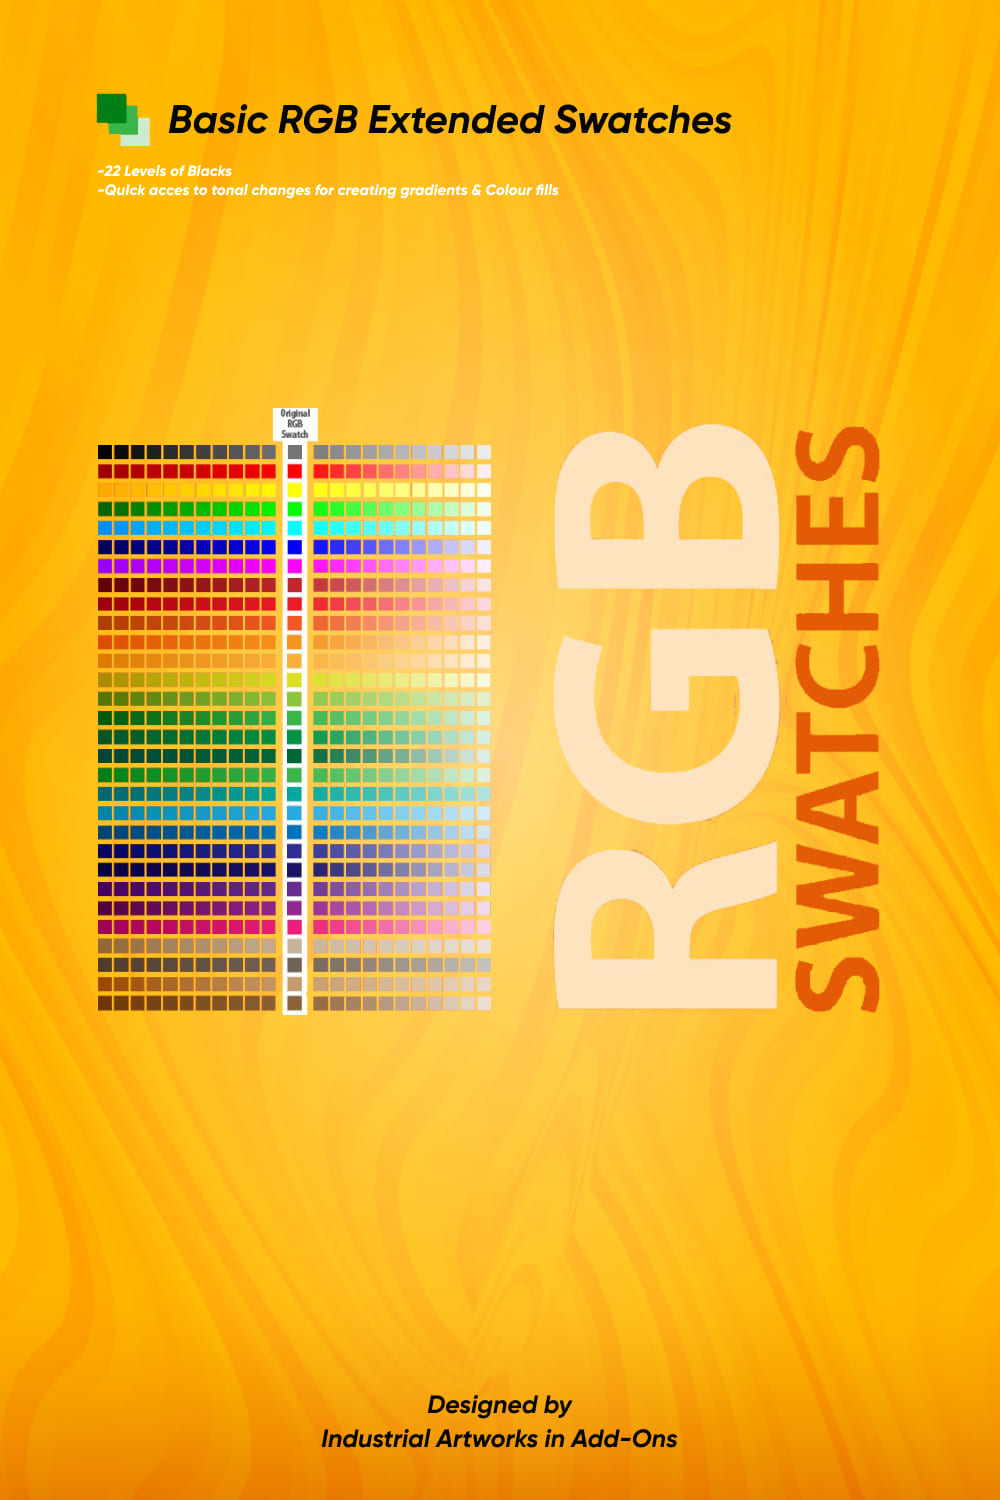 rgb extended swatches illustrator pinterest image.